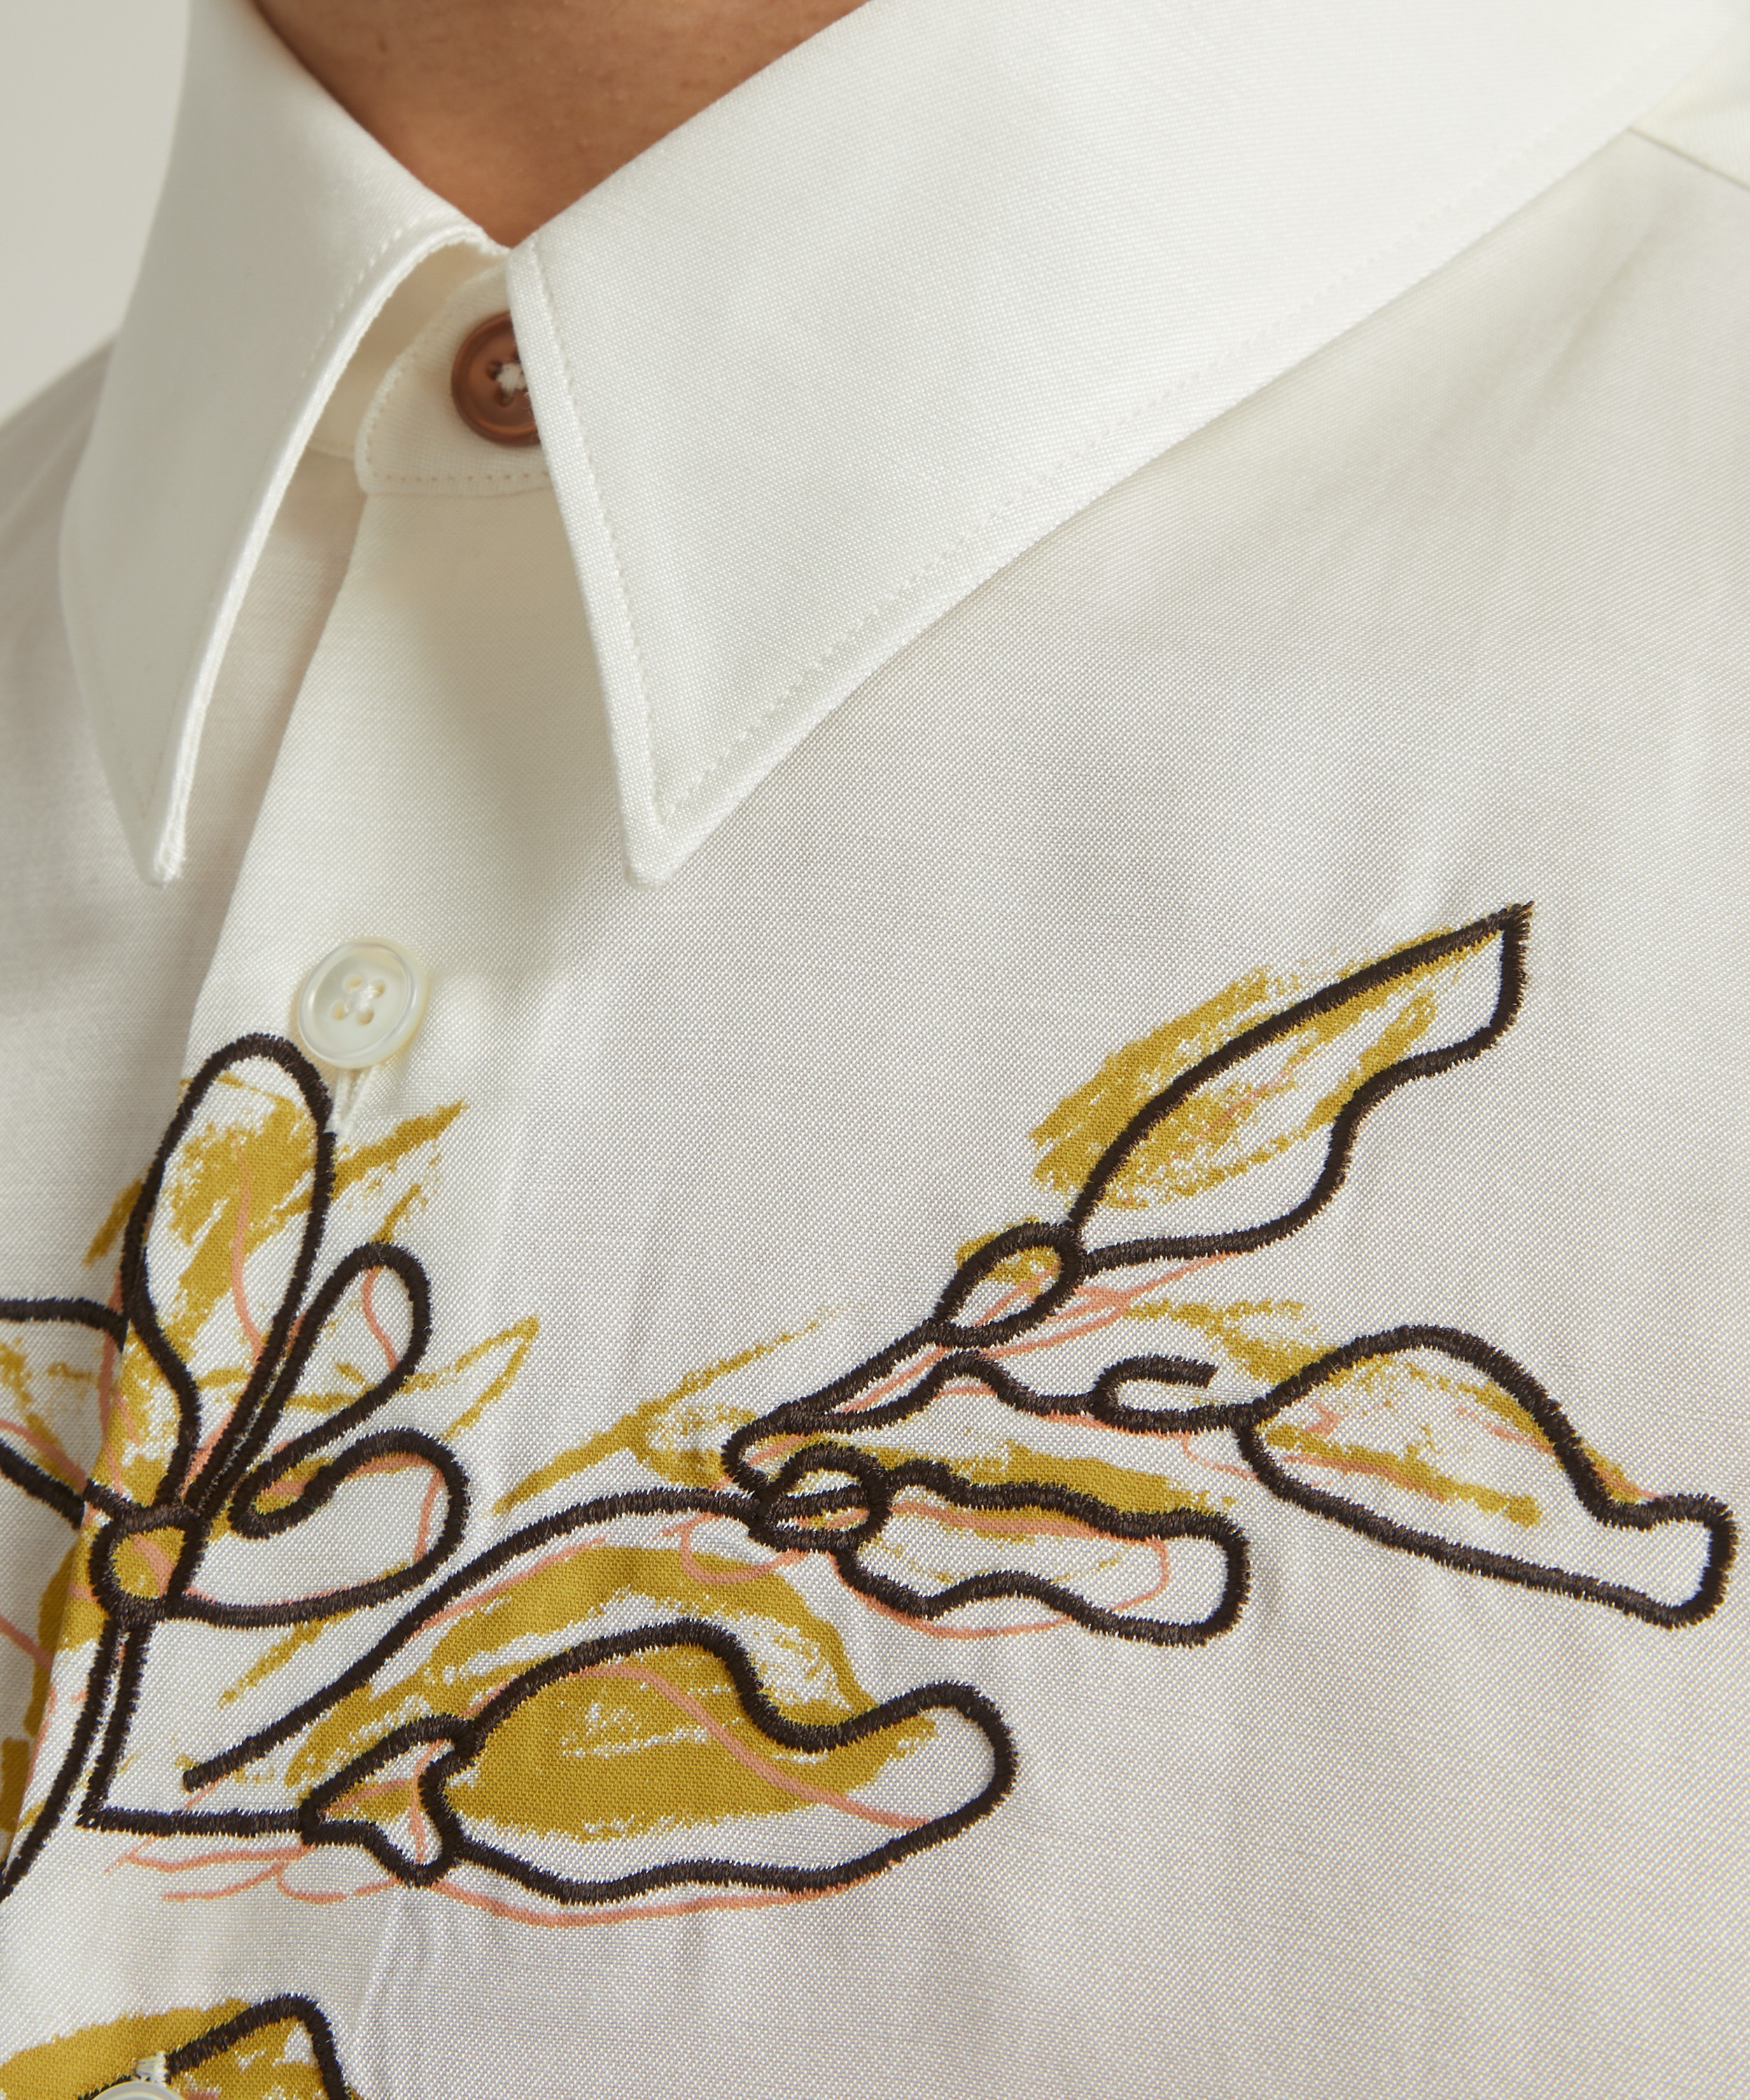 Paul Smith Embroidered Laurel Shirt | Liberty